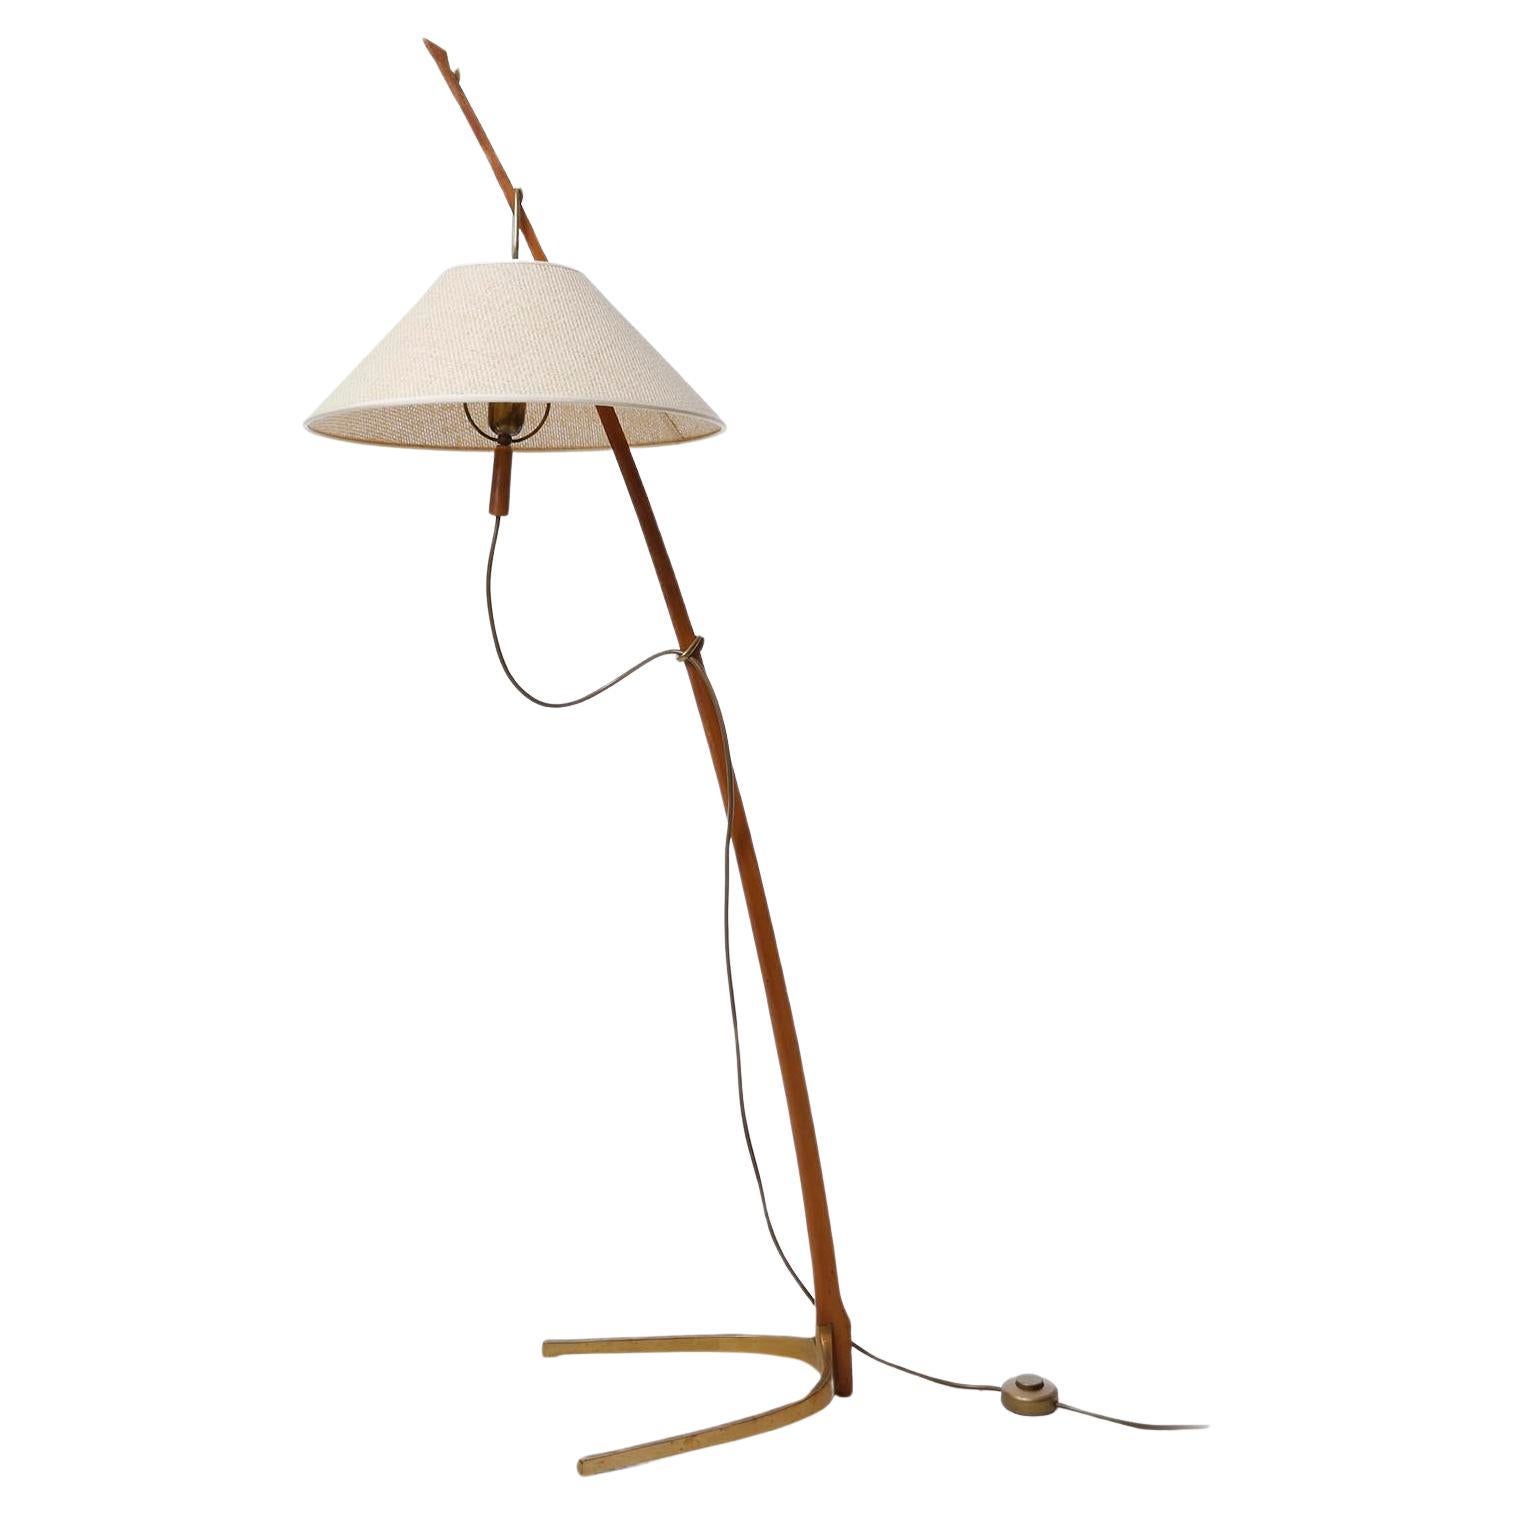 A gorgeous floor lamp by J.T. Kalmar, Vienna, Austria, manufactured in midcentury, circa 1960 (1950s or 1960s).
The light is documented in the Kalmar catalogues from 1952 as well as from 1960.
'Dornstab' is the German word for 'thorn stick'. Four